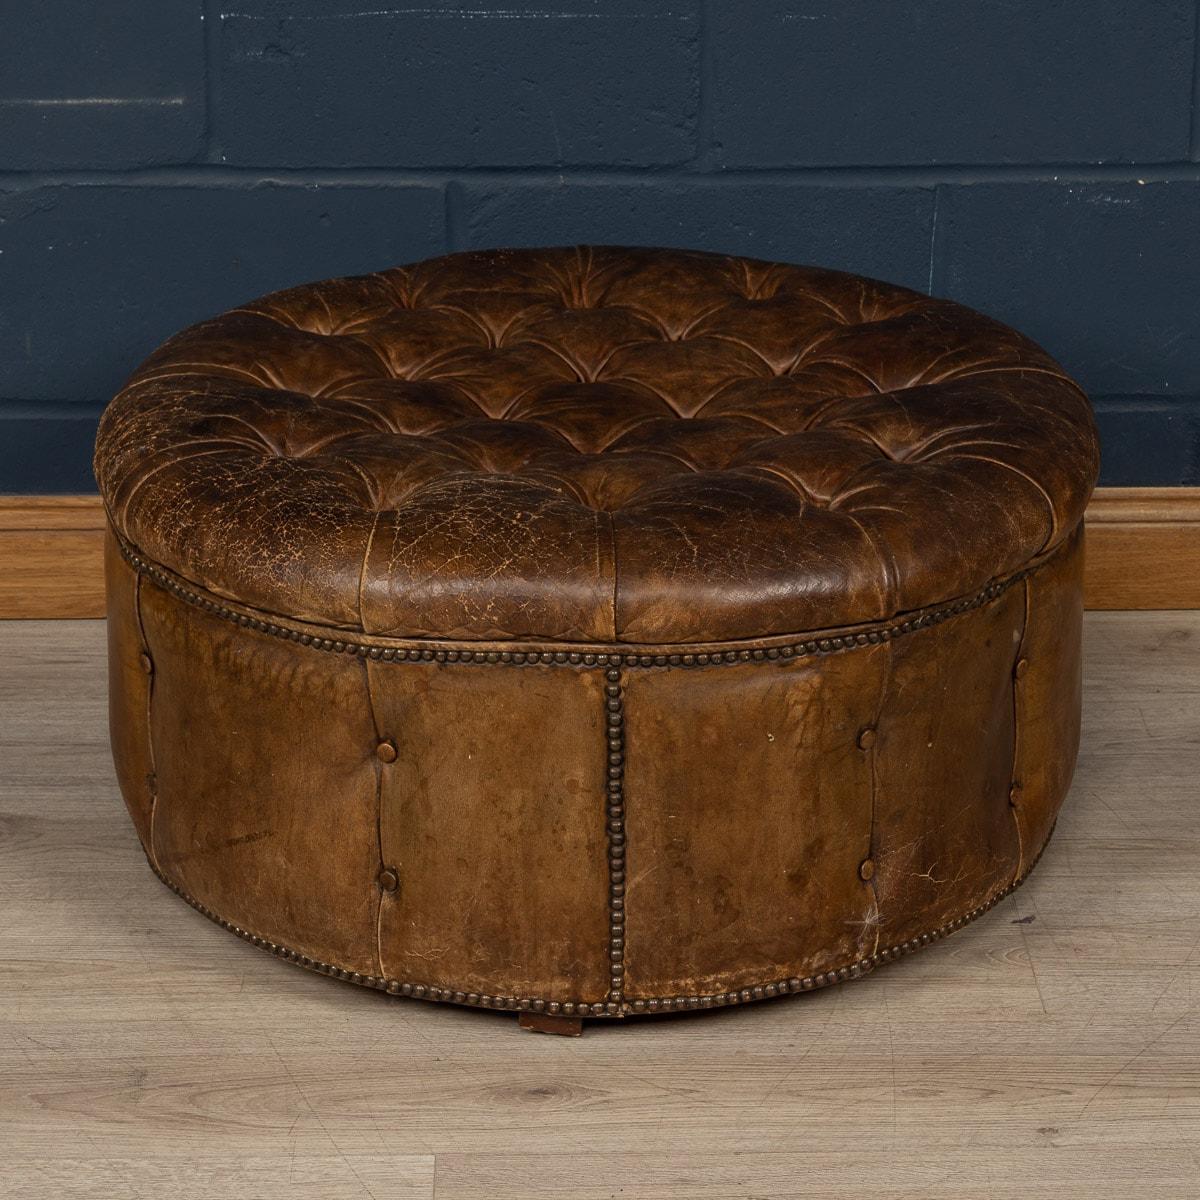 British 20th Century English Large Round Brown Leather Button-Back Footstool